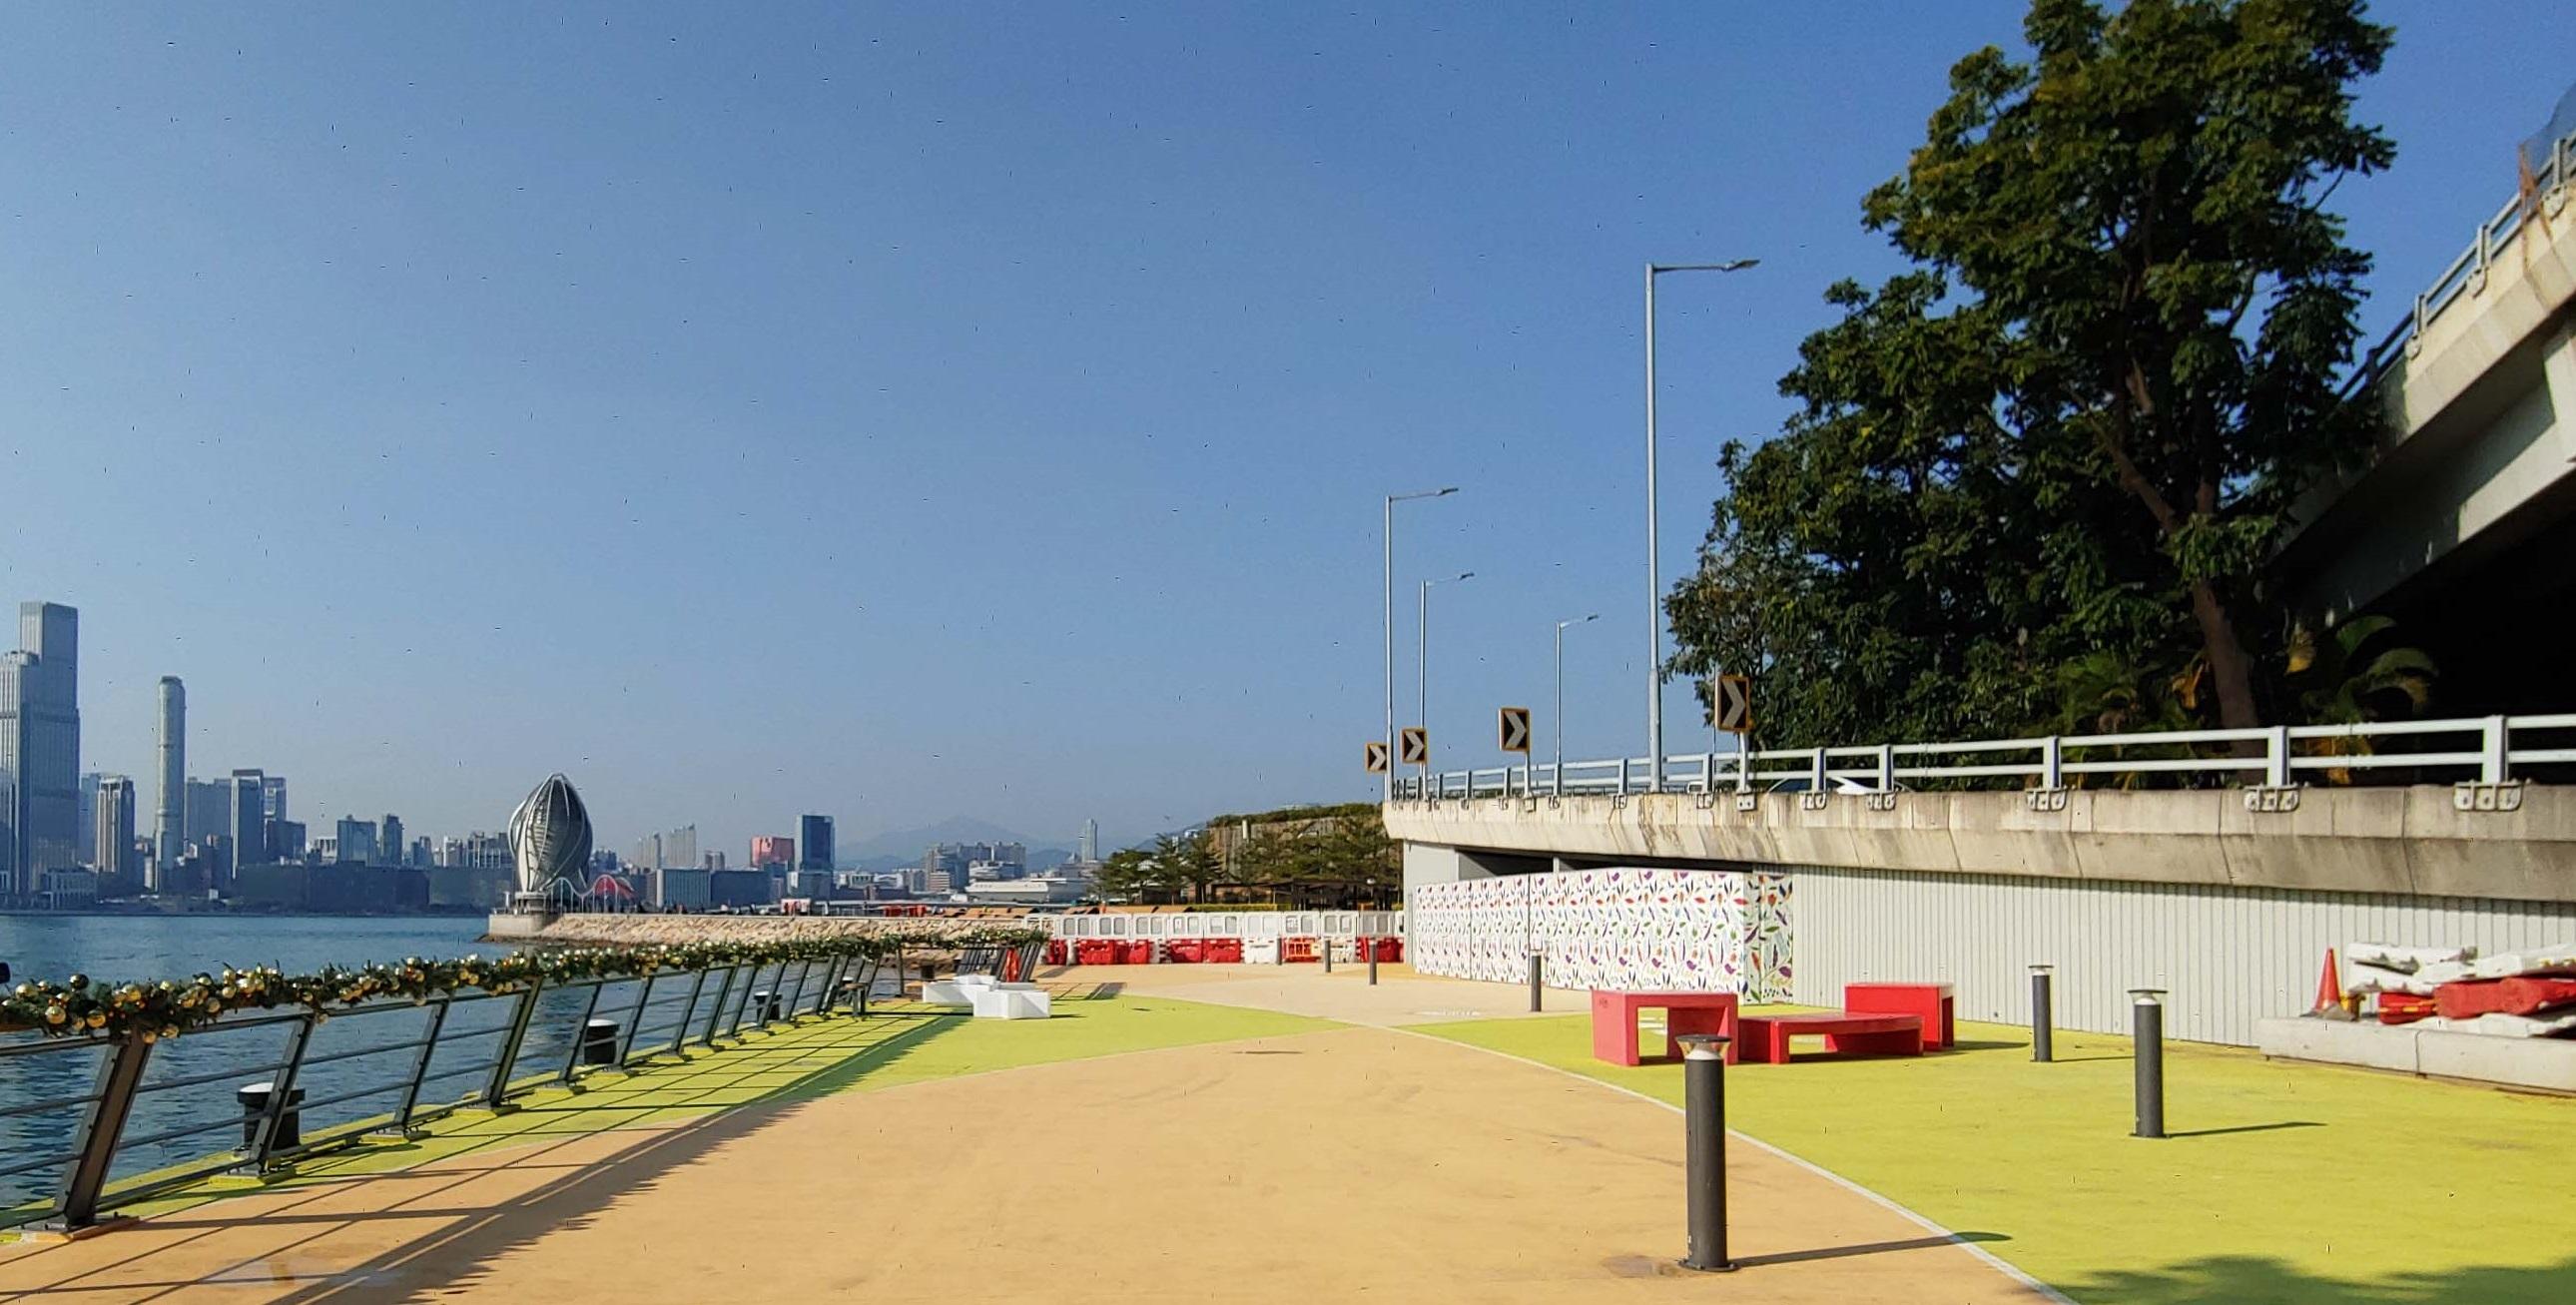 The East Coast Park Precinct (Phase 1a) opened today (December 30), connecting the harbourfront sites around Fortress Hill and Causeway Bay Typhoon Shelter.